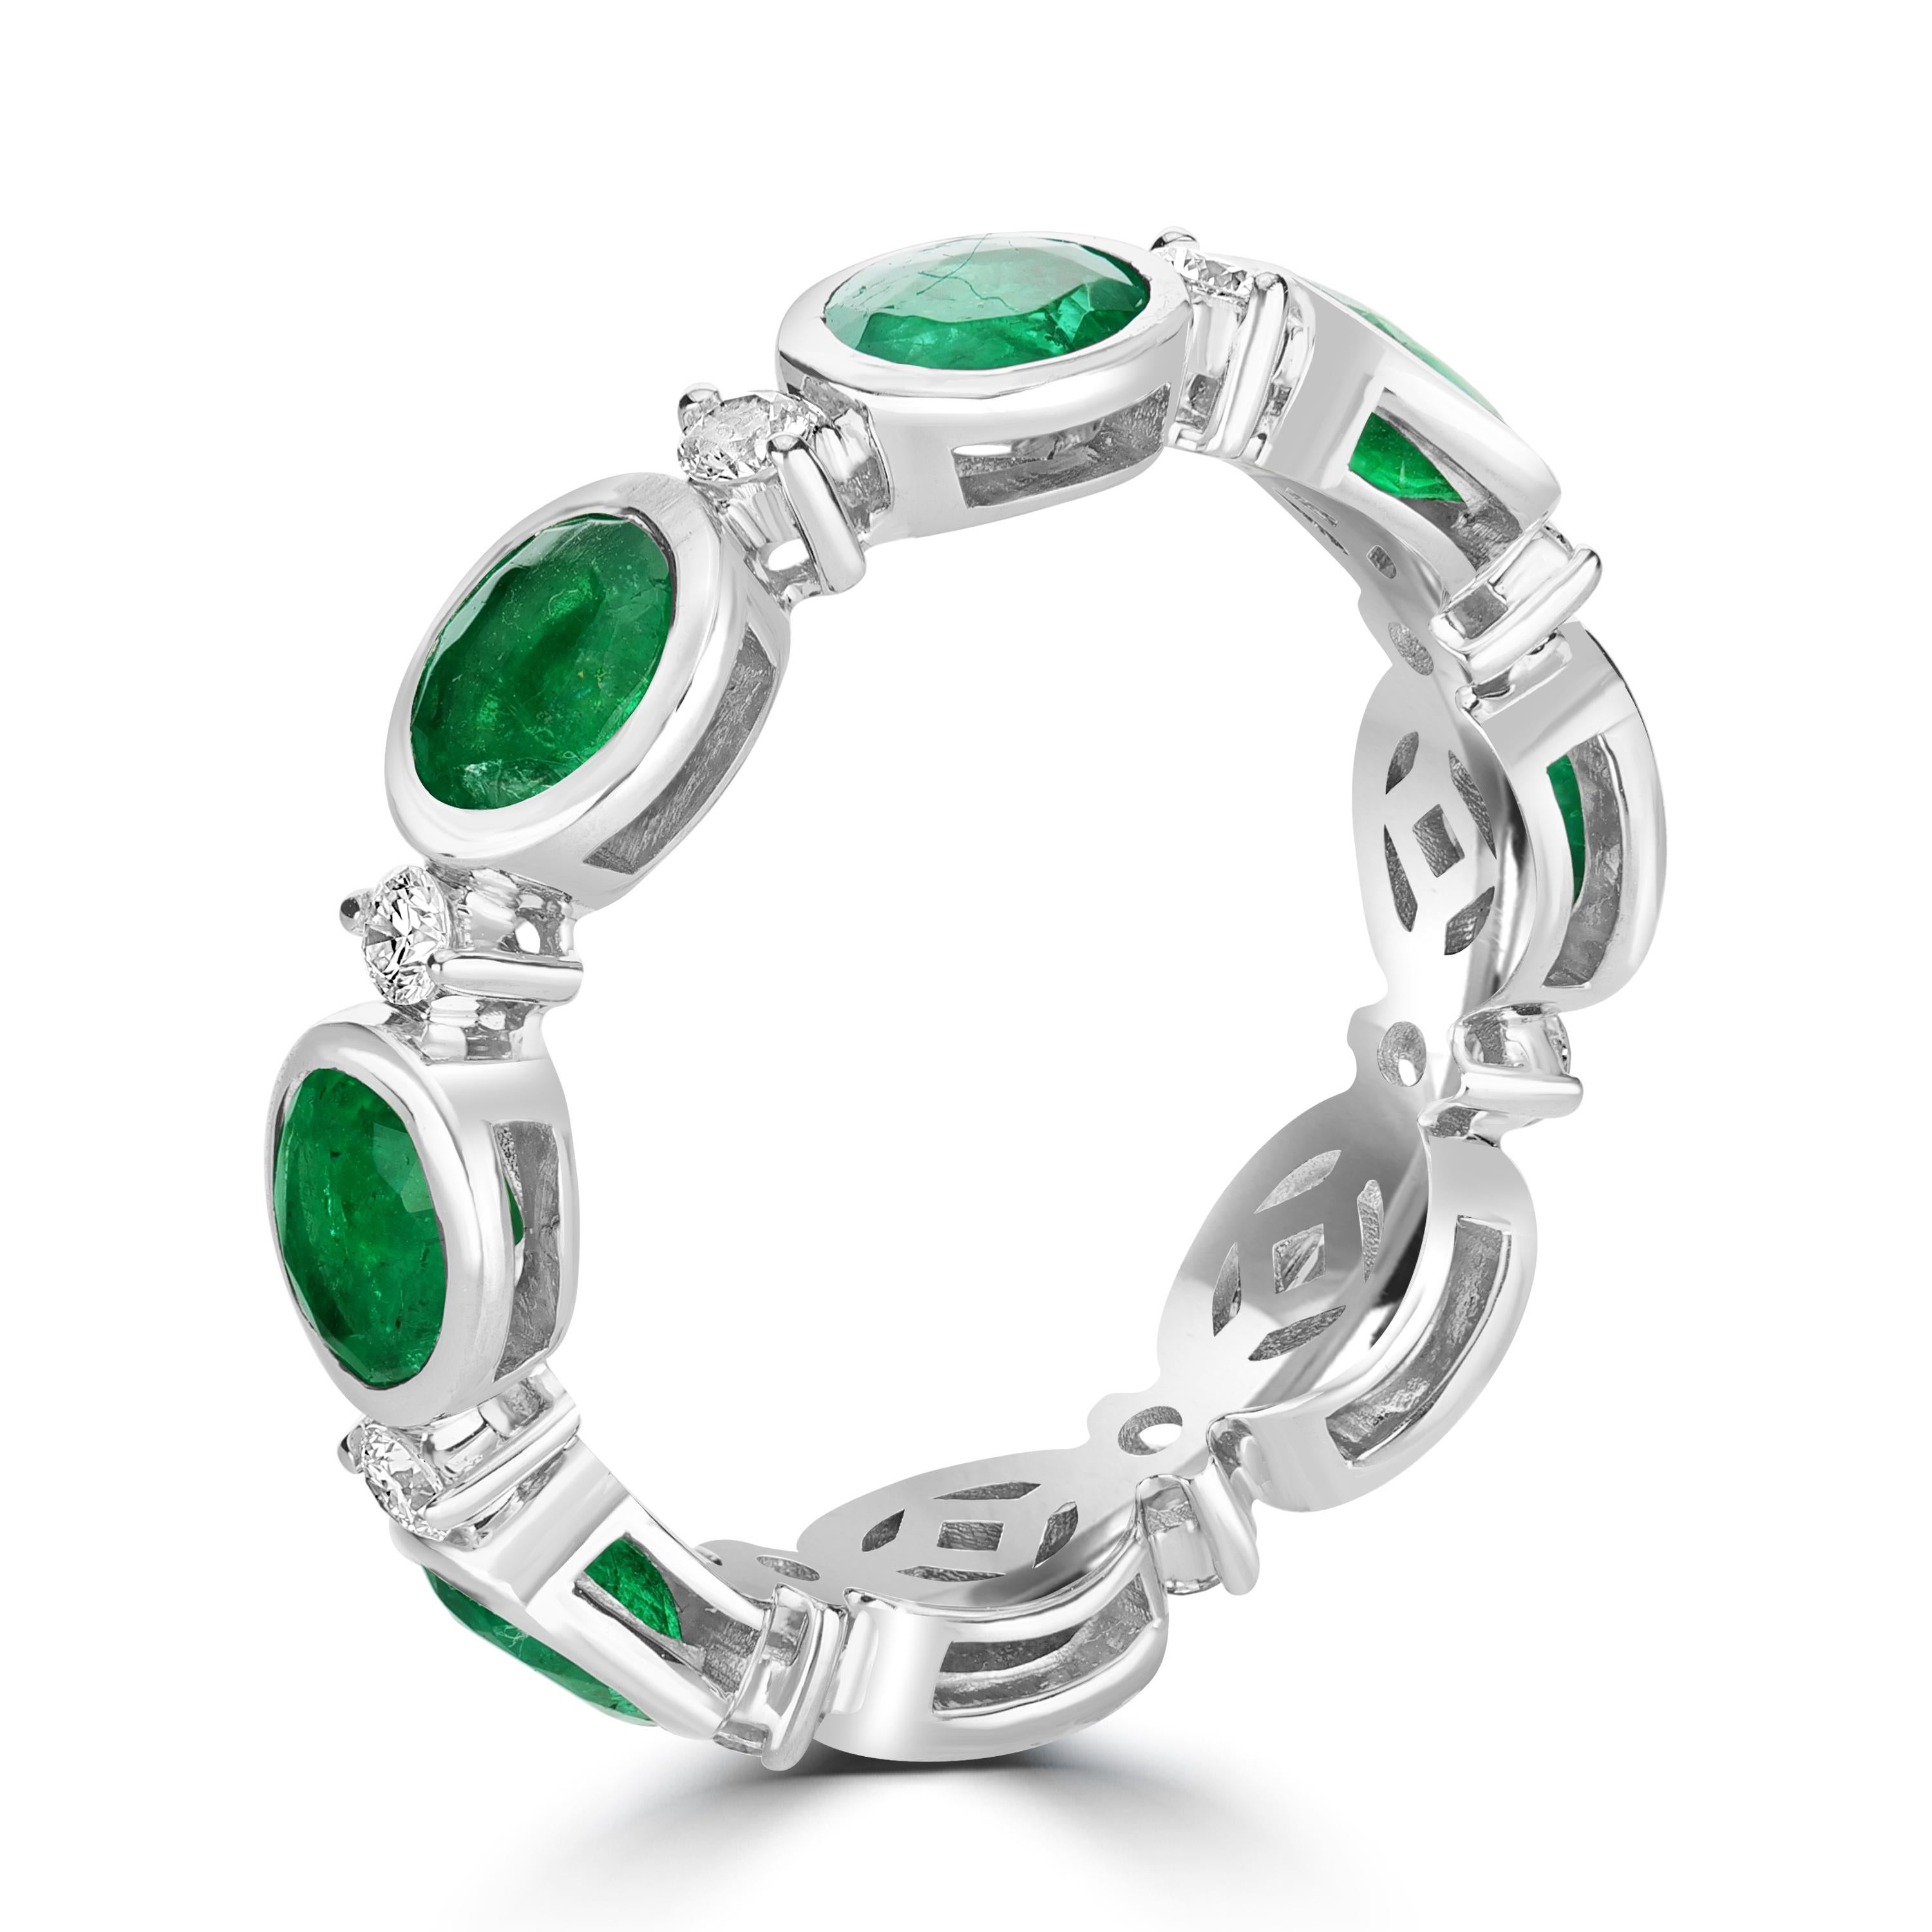 This spectacular emerald and diamond eternity band ring is the one for your jewelry collection. Set in bezel setting, this ring has emeralds from Zambia known for its exquisite bluish green hue, The diamonds used are of G-H color and SI clarity. The